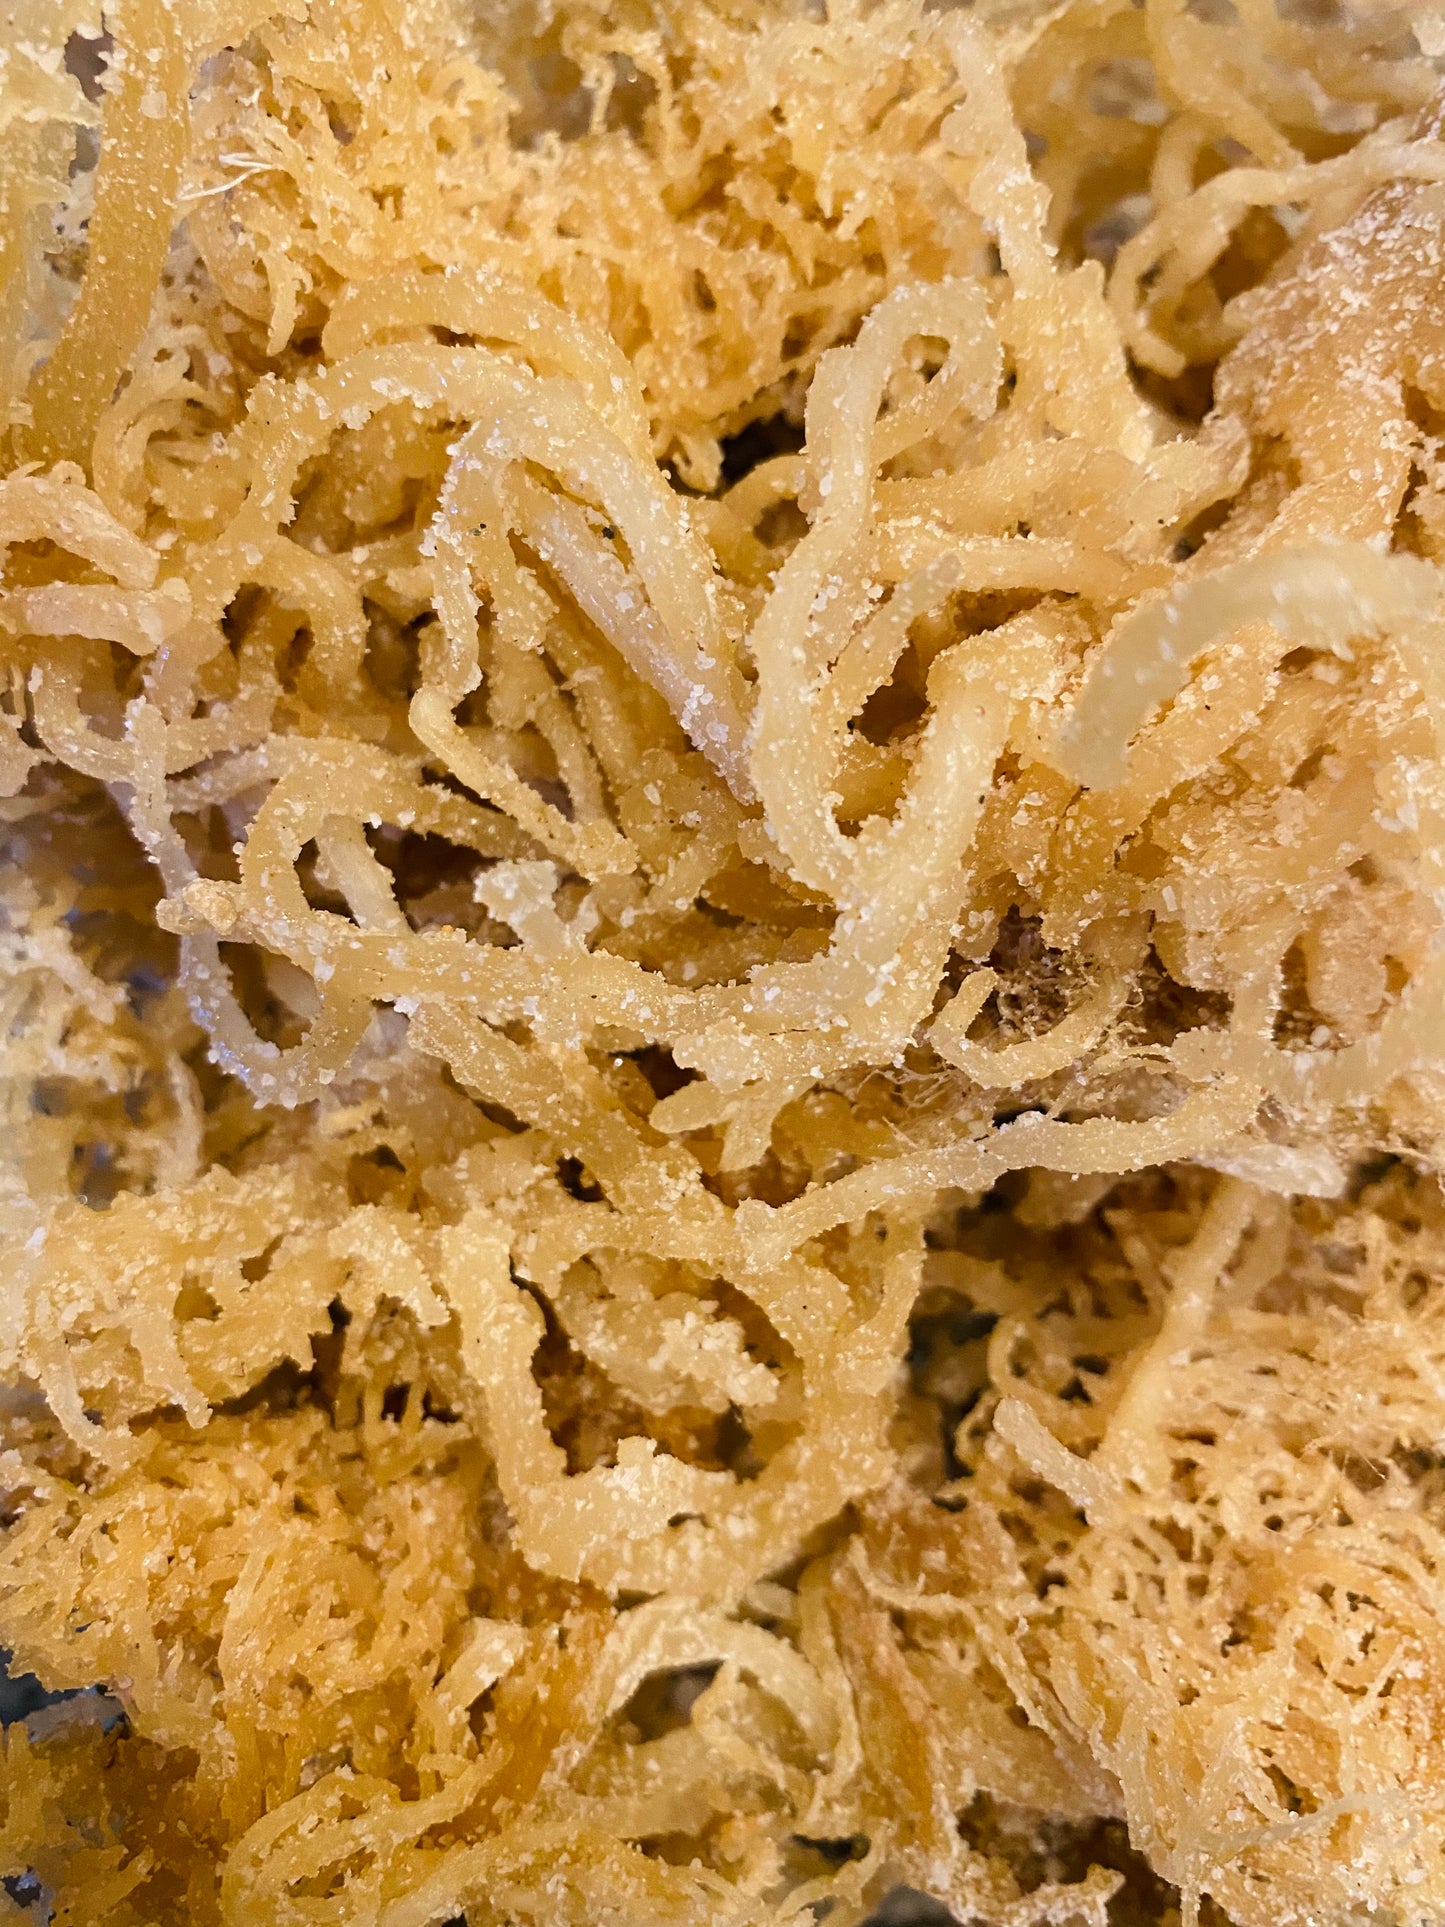 Wildcrafted Sea Moss